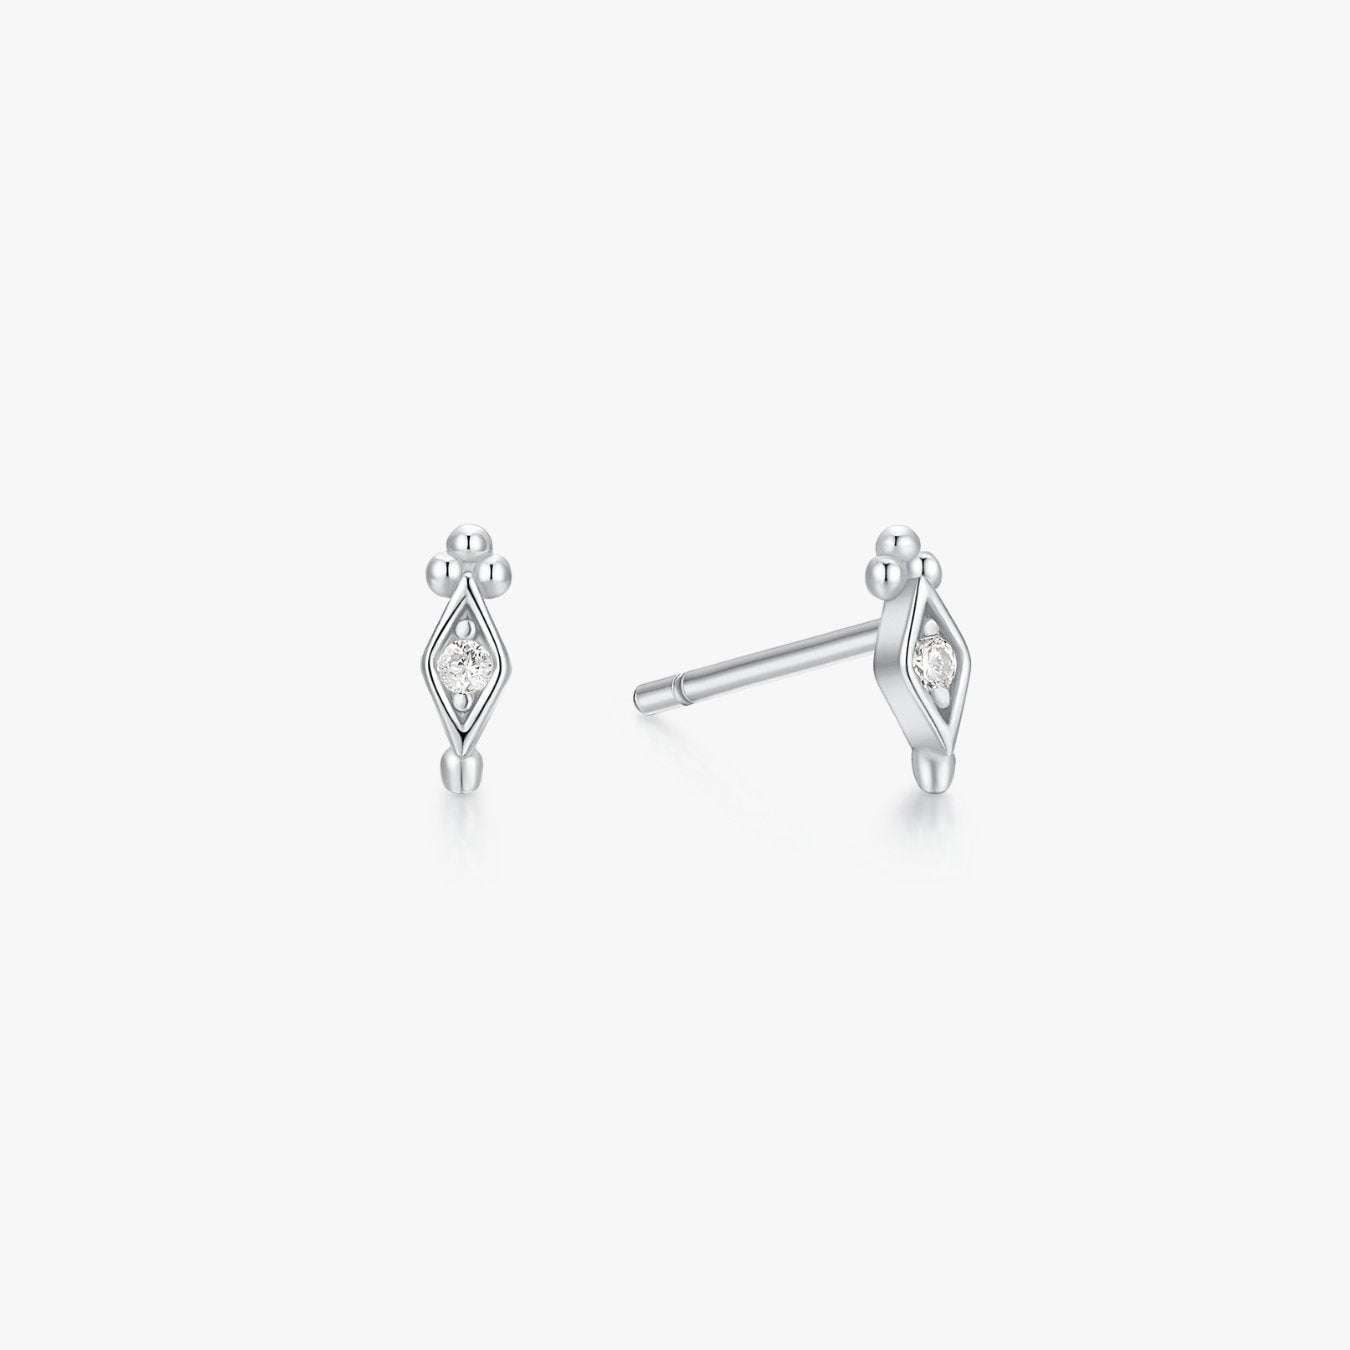 Clear Gem Freya Studs in Silver - Flaire & Co.